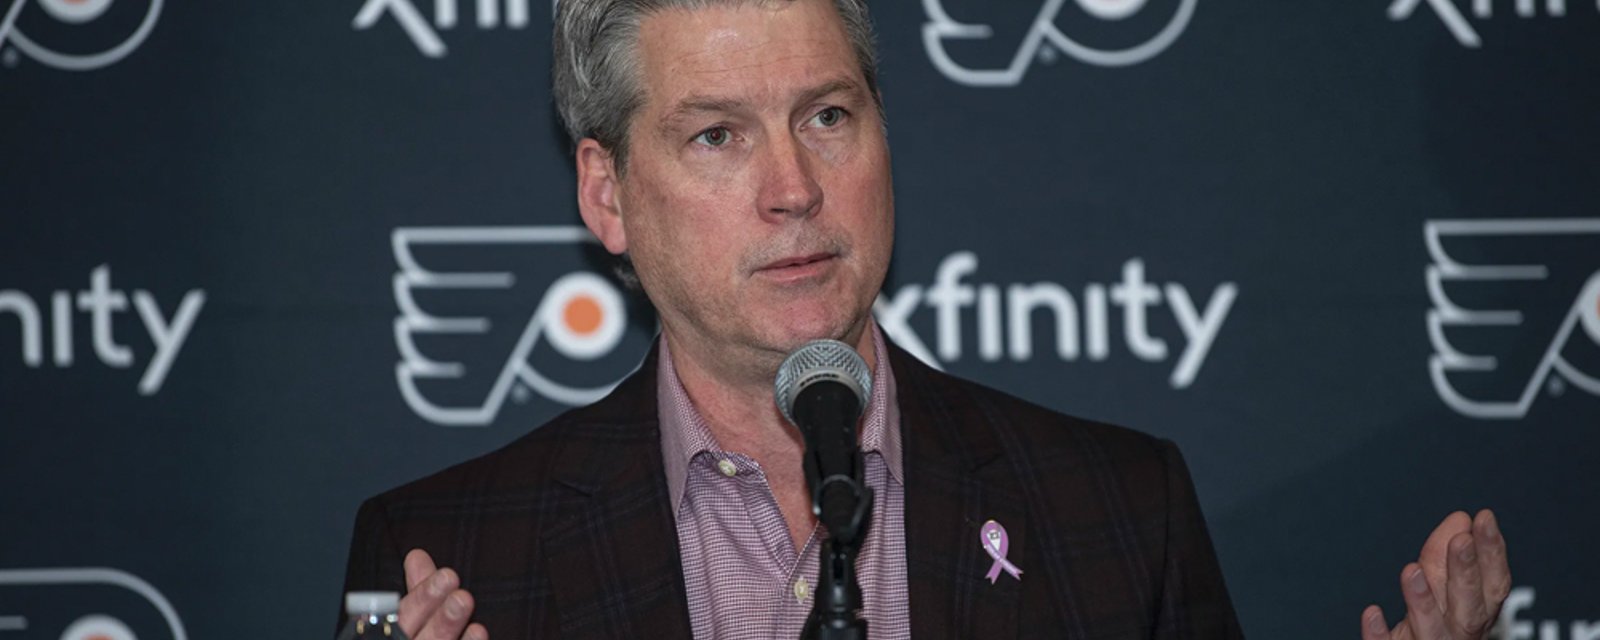 Flyers make a number of personnel moves, GM Fletcher meets with the media